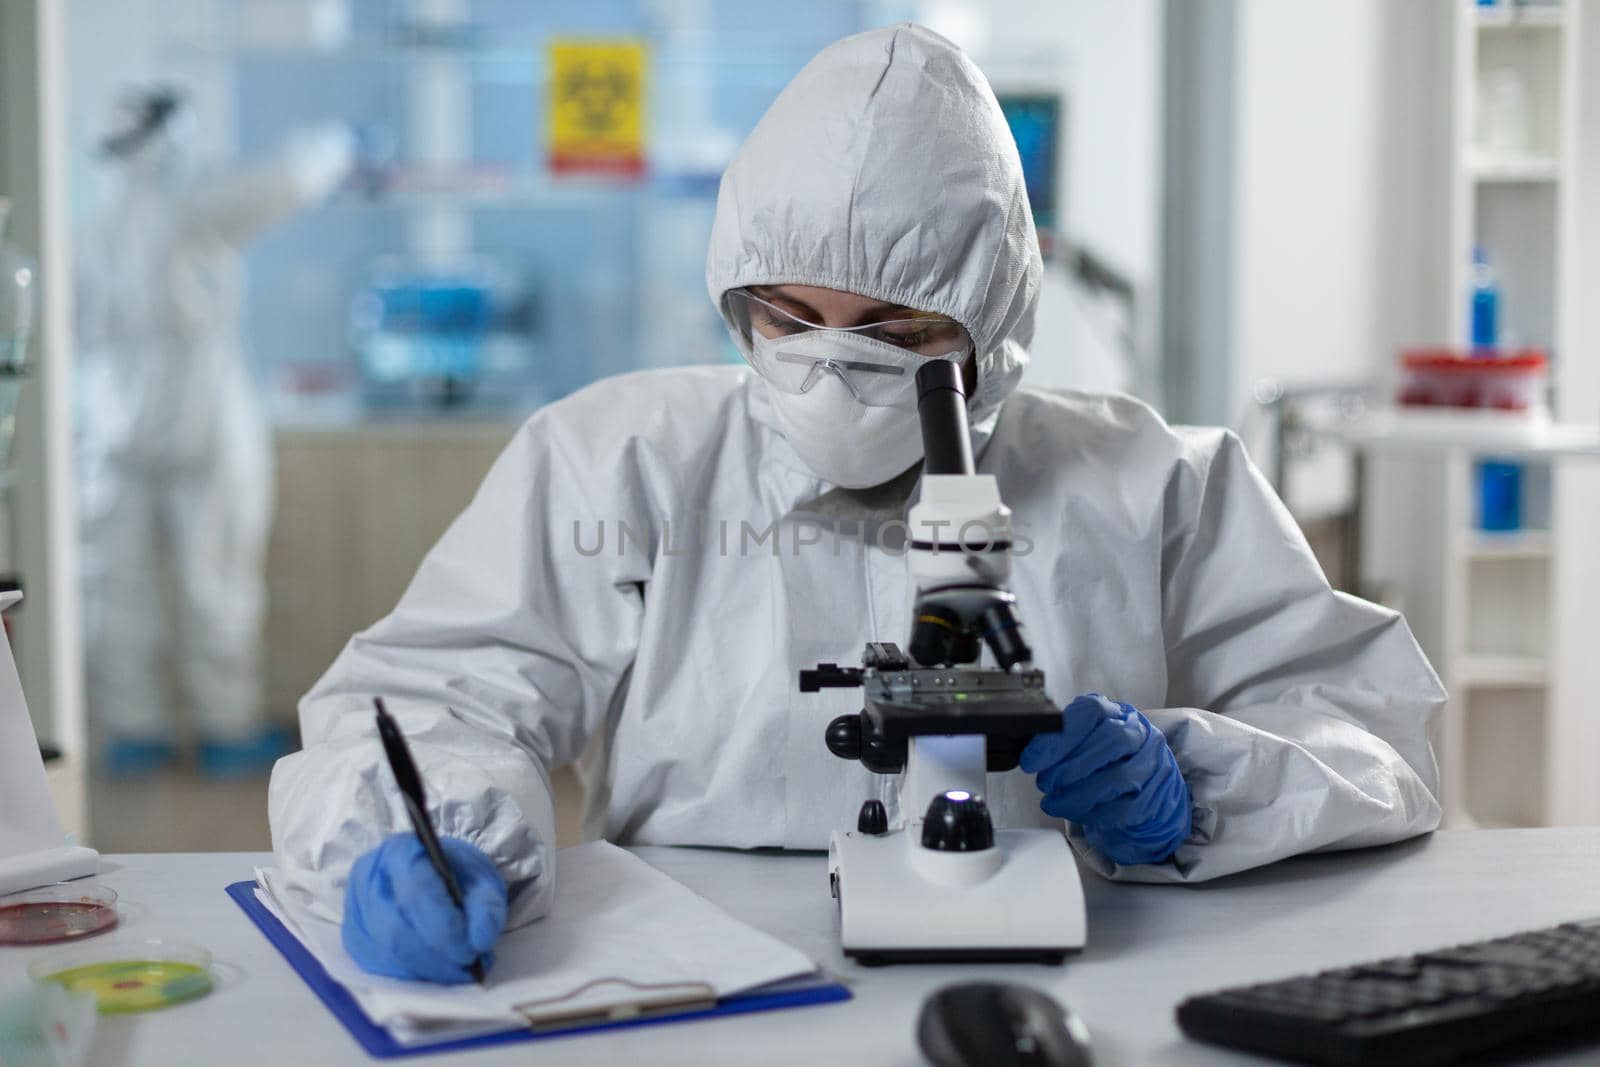 Biologist researcher wearing protective suit analyzing chemicals using medical microscope by DCStudio